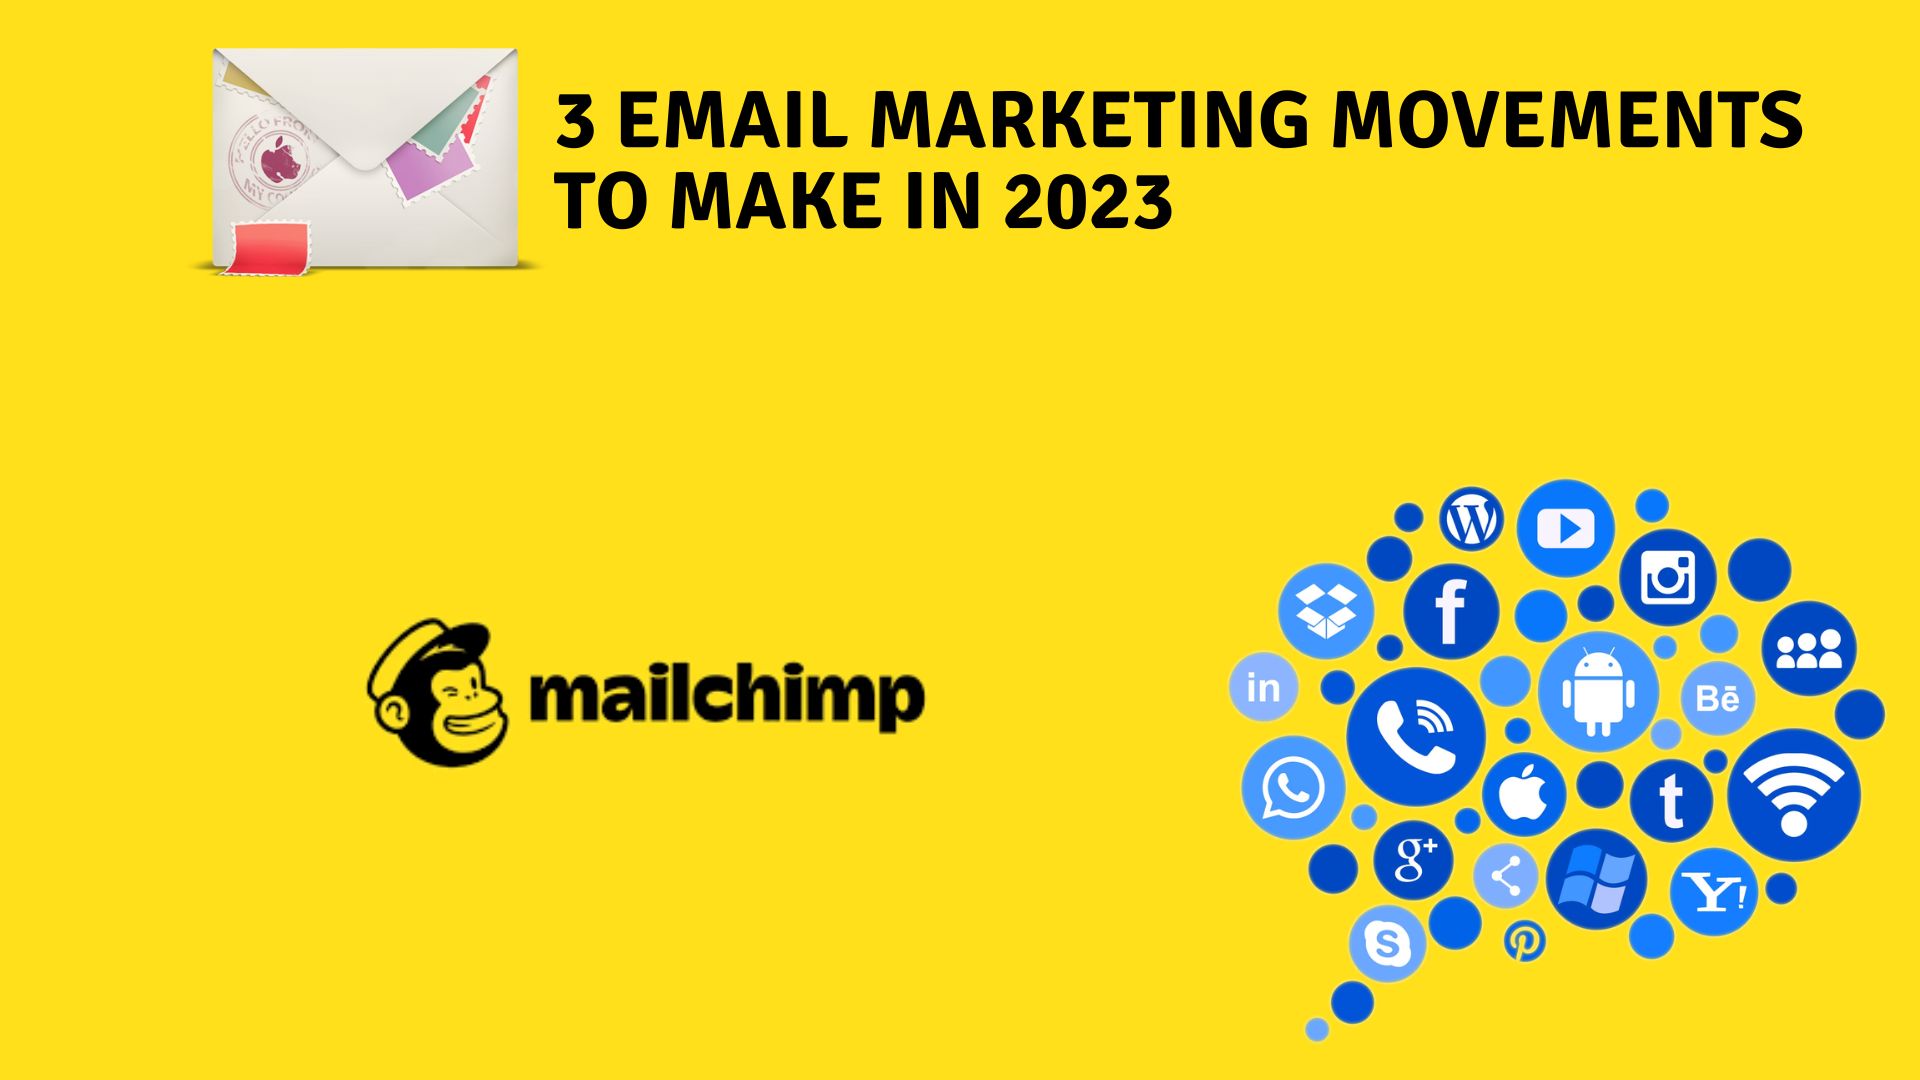 3 email marketing movements to make in 2023